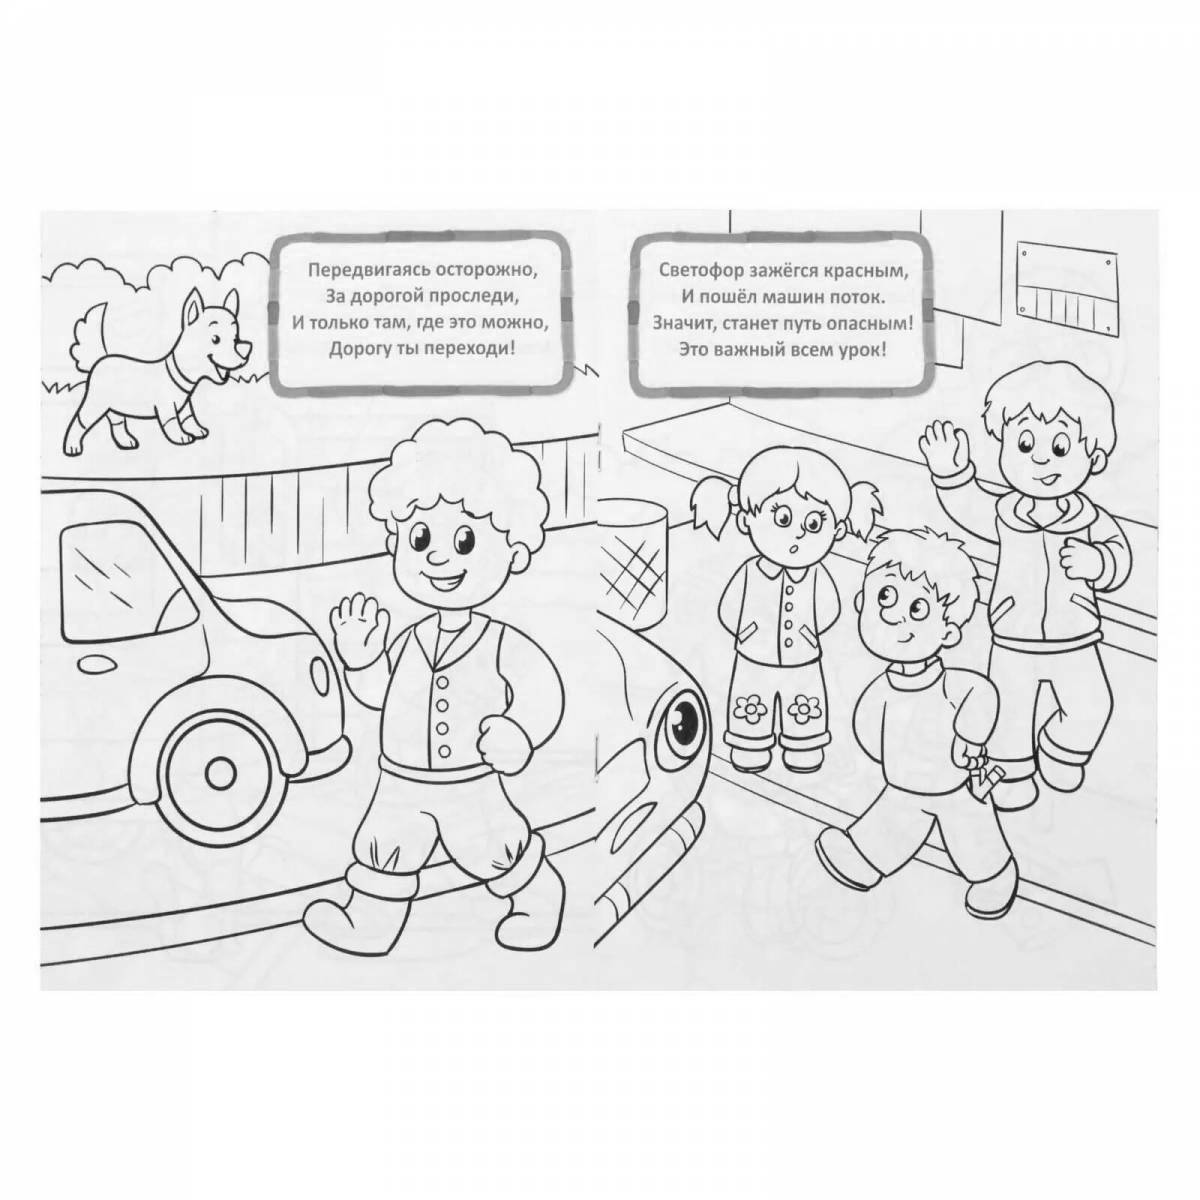 Rules of the road for schoolchildren #13